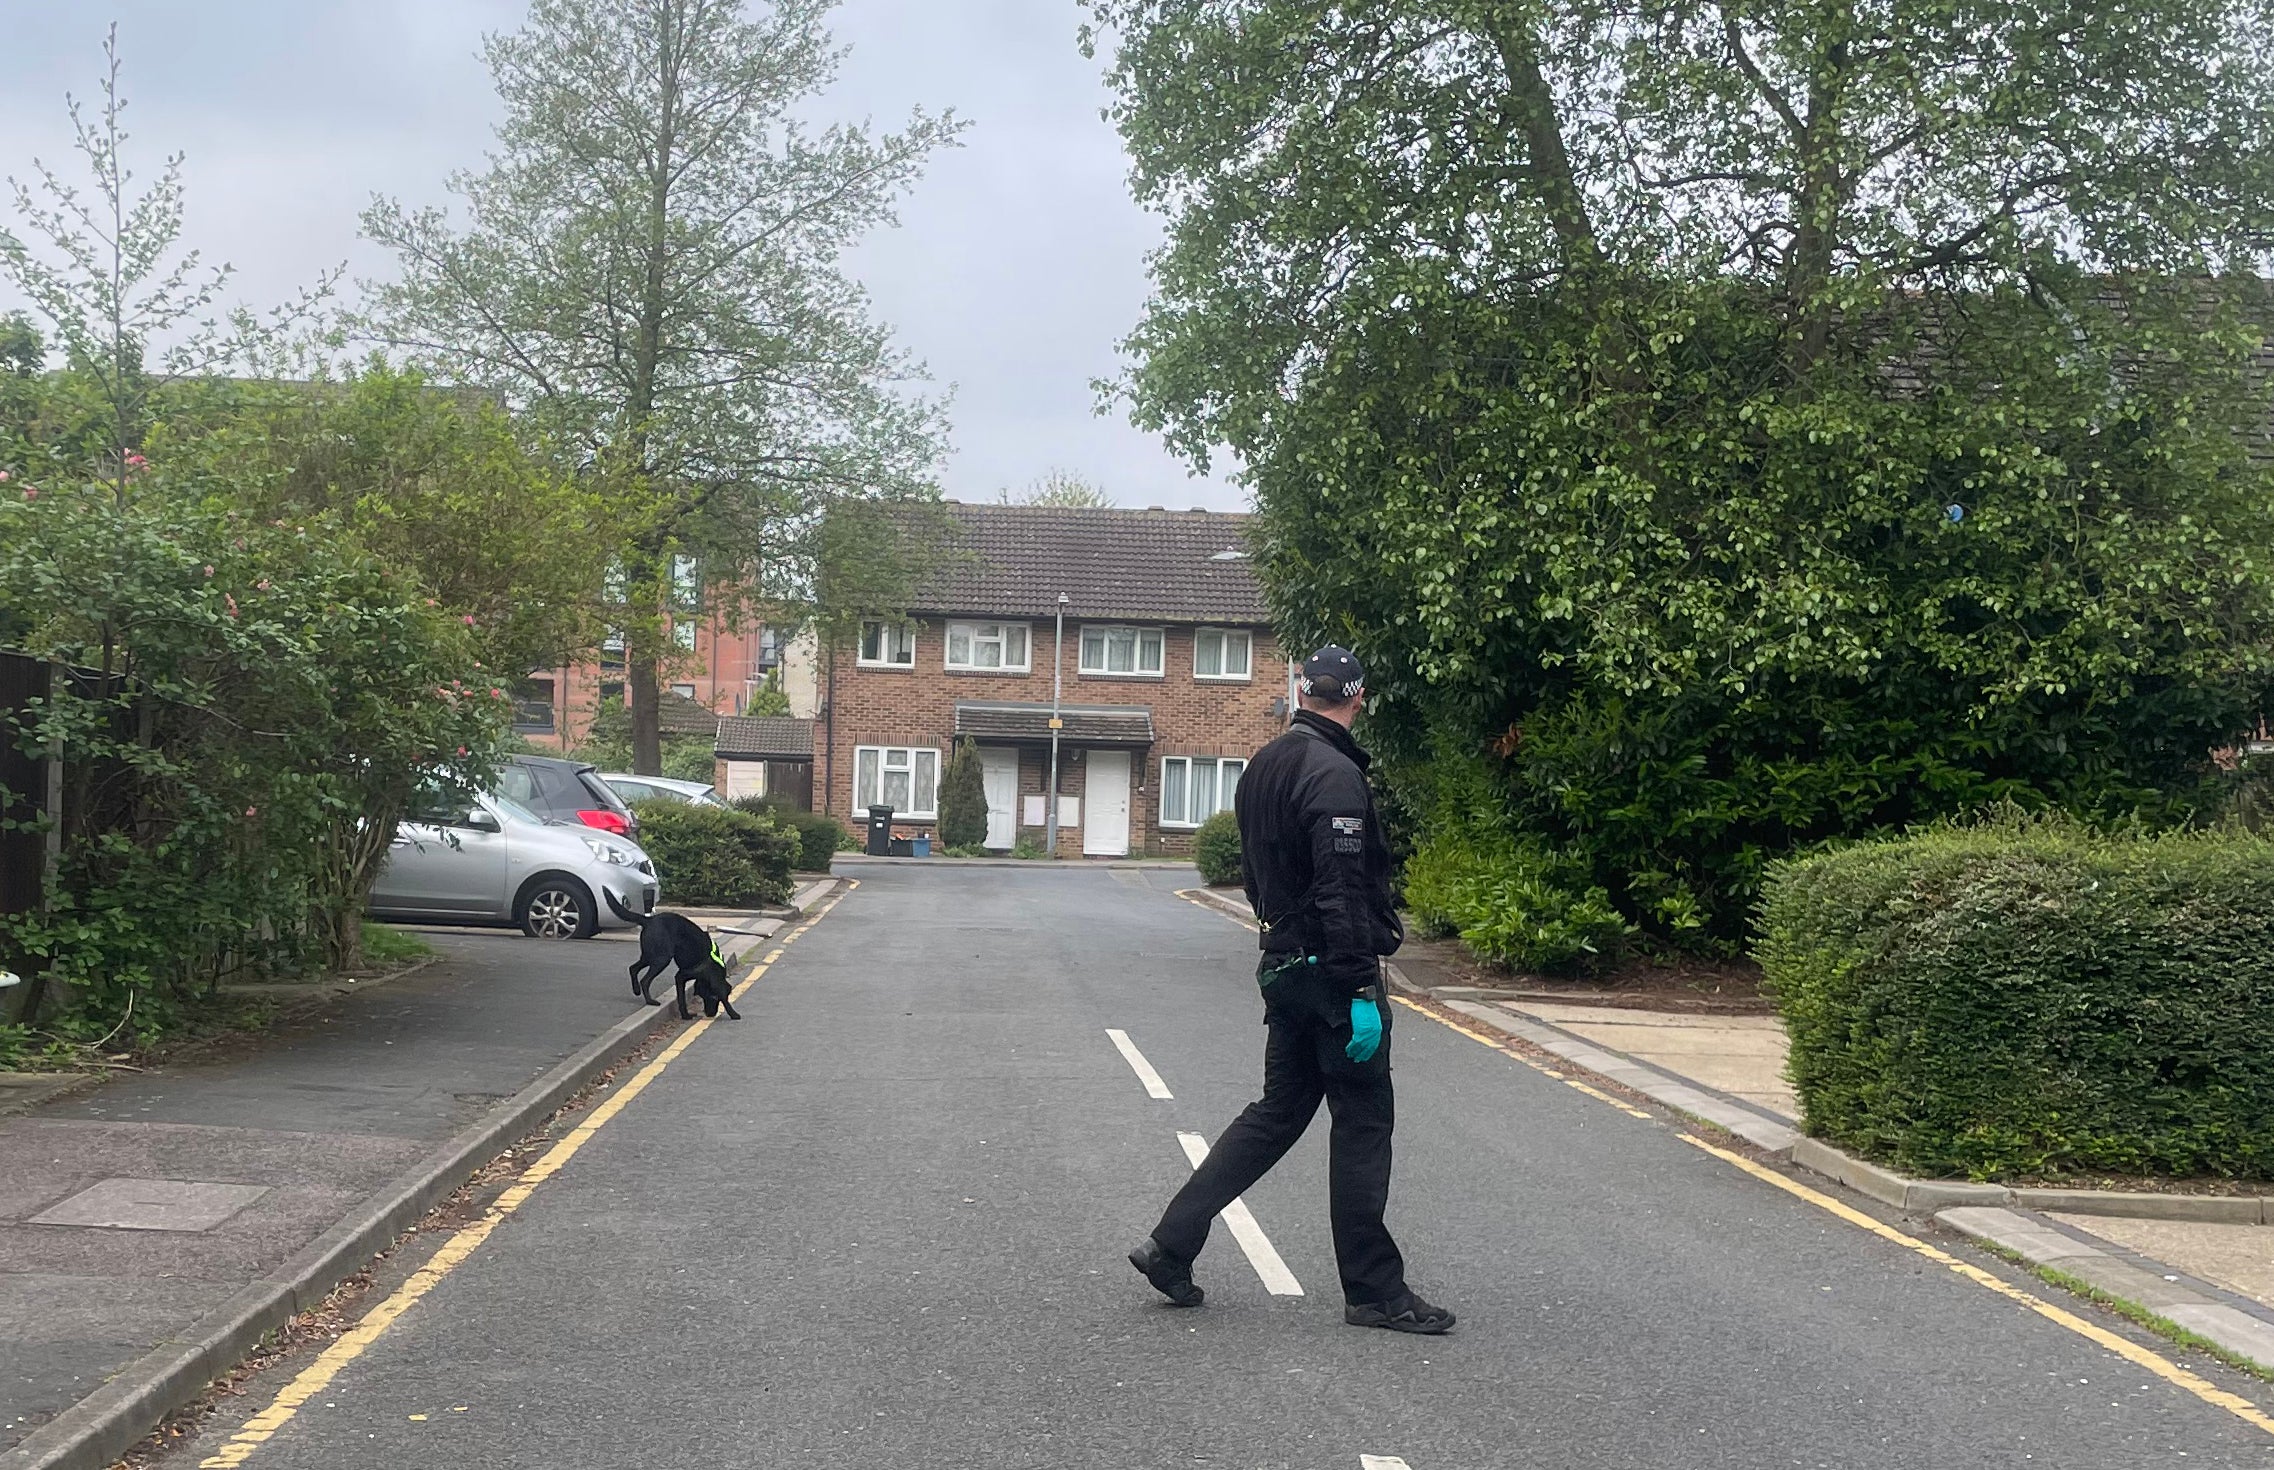 A police dog sweeps the area where a 14-year-old boy was killed in a sword attack on Tuesday that saw four others injured